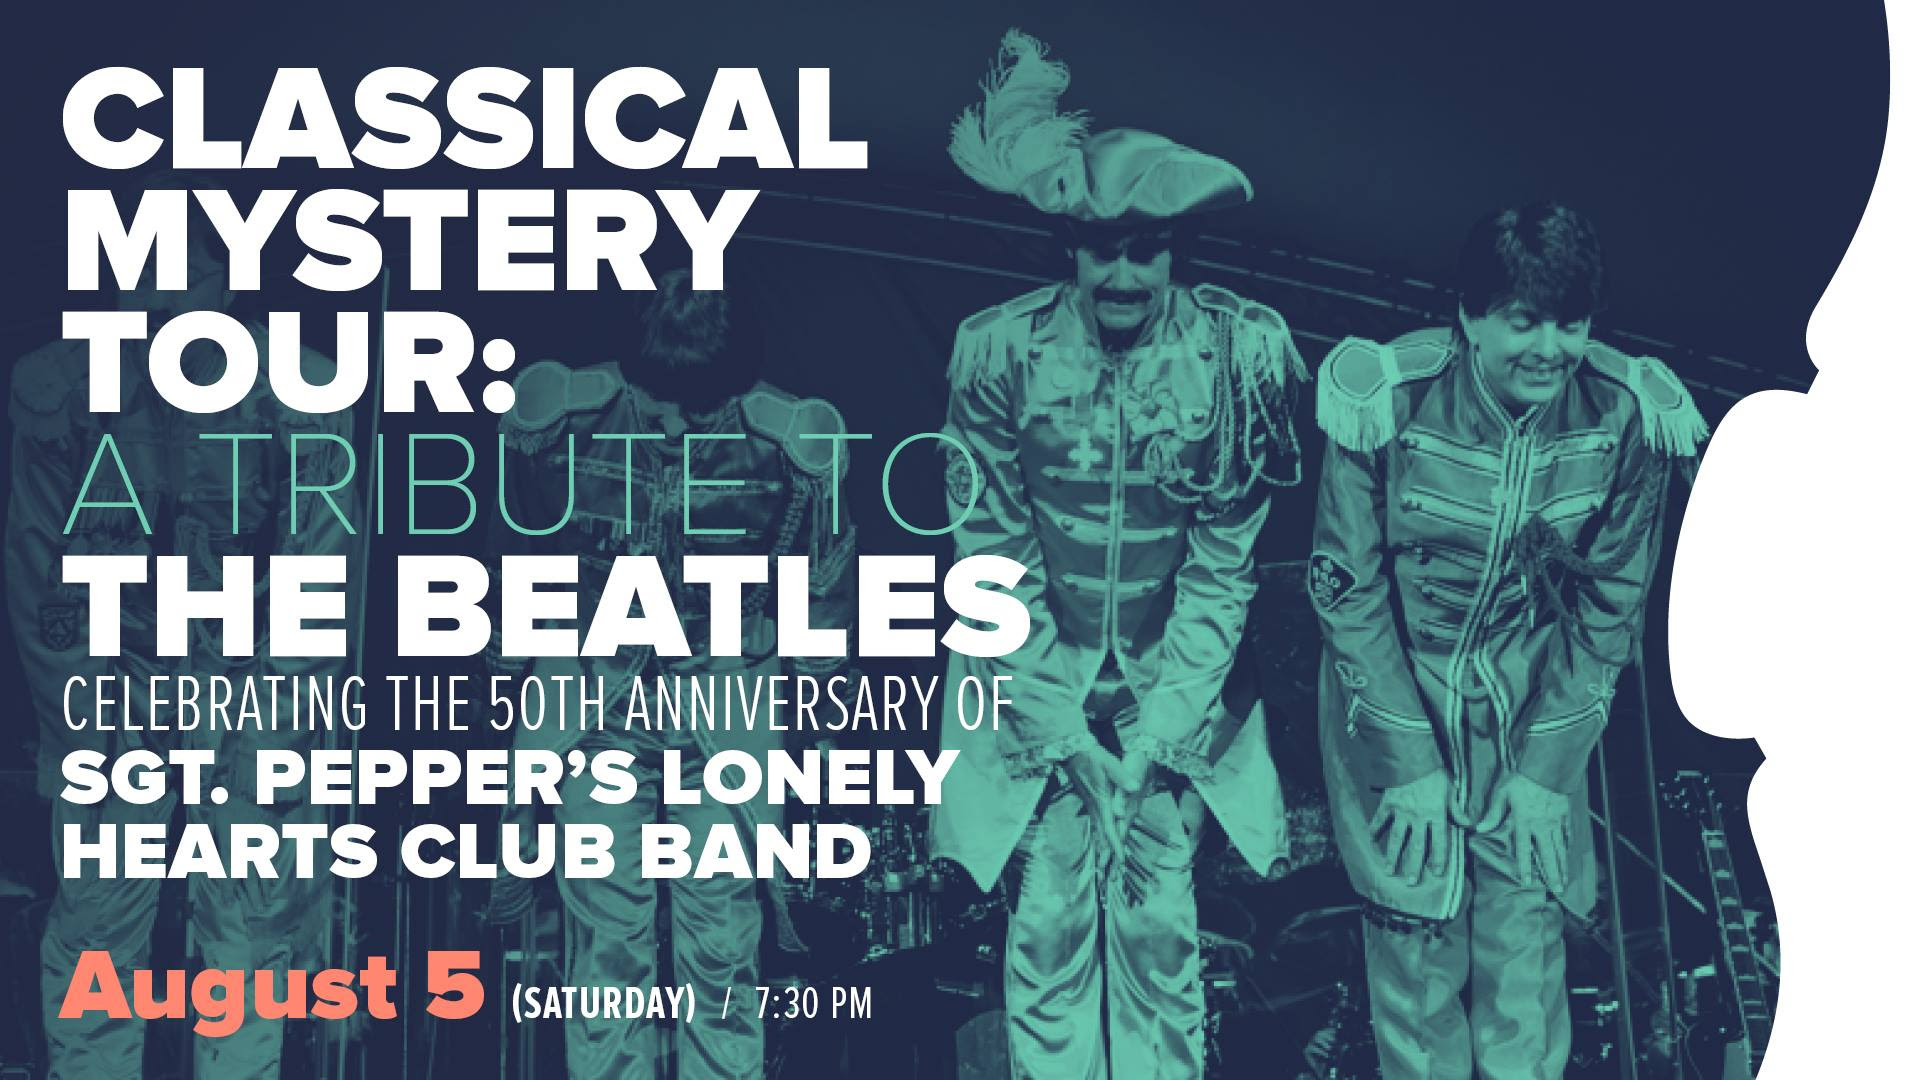 Classical Mystery Tour: A Tribute to the Beatles